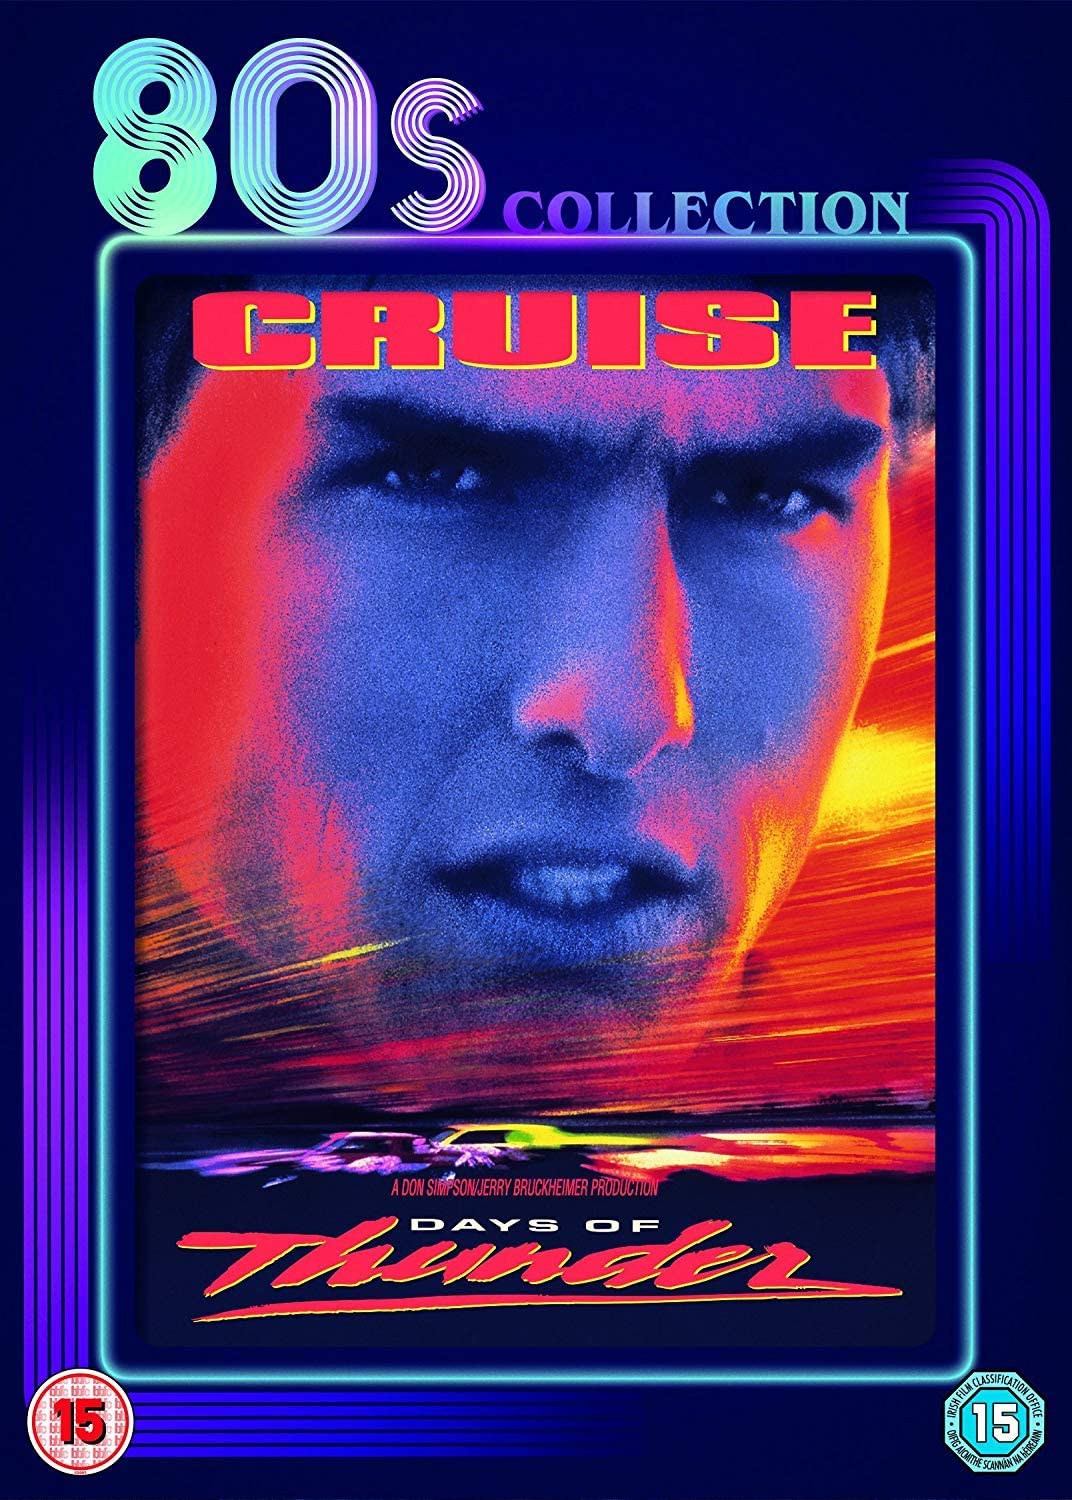 Days of Thunder - 80s Collection [2018] - [DVD]